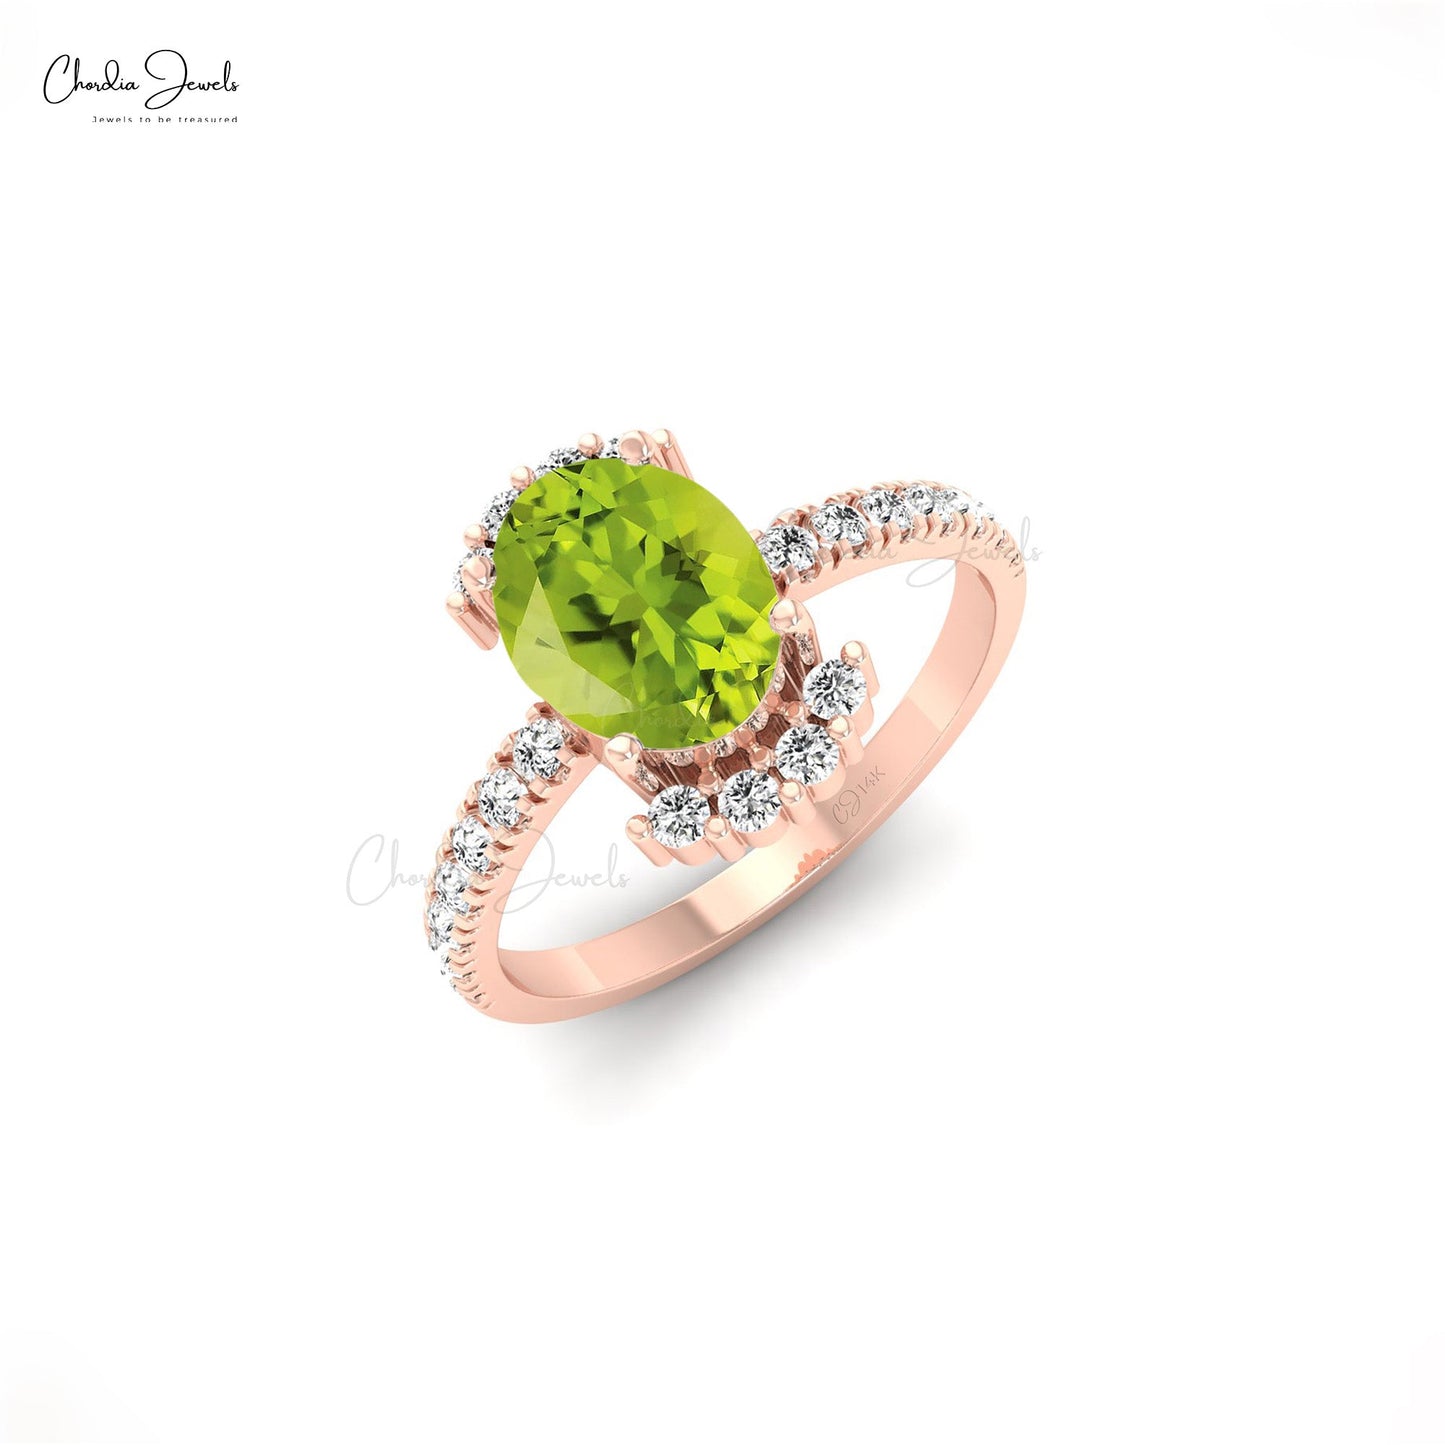 Real 14k Gold Oval Shaped Green Peridot Ring for Wedding with Diamond Side Stone